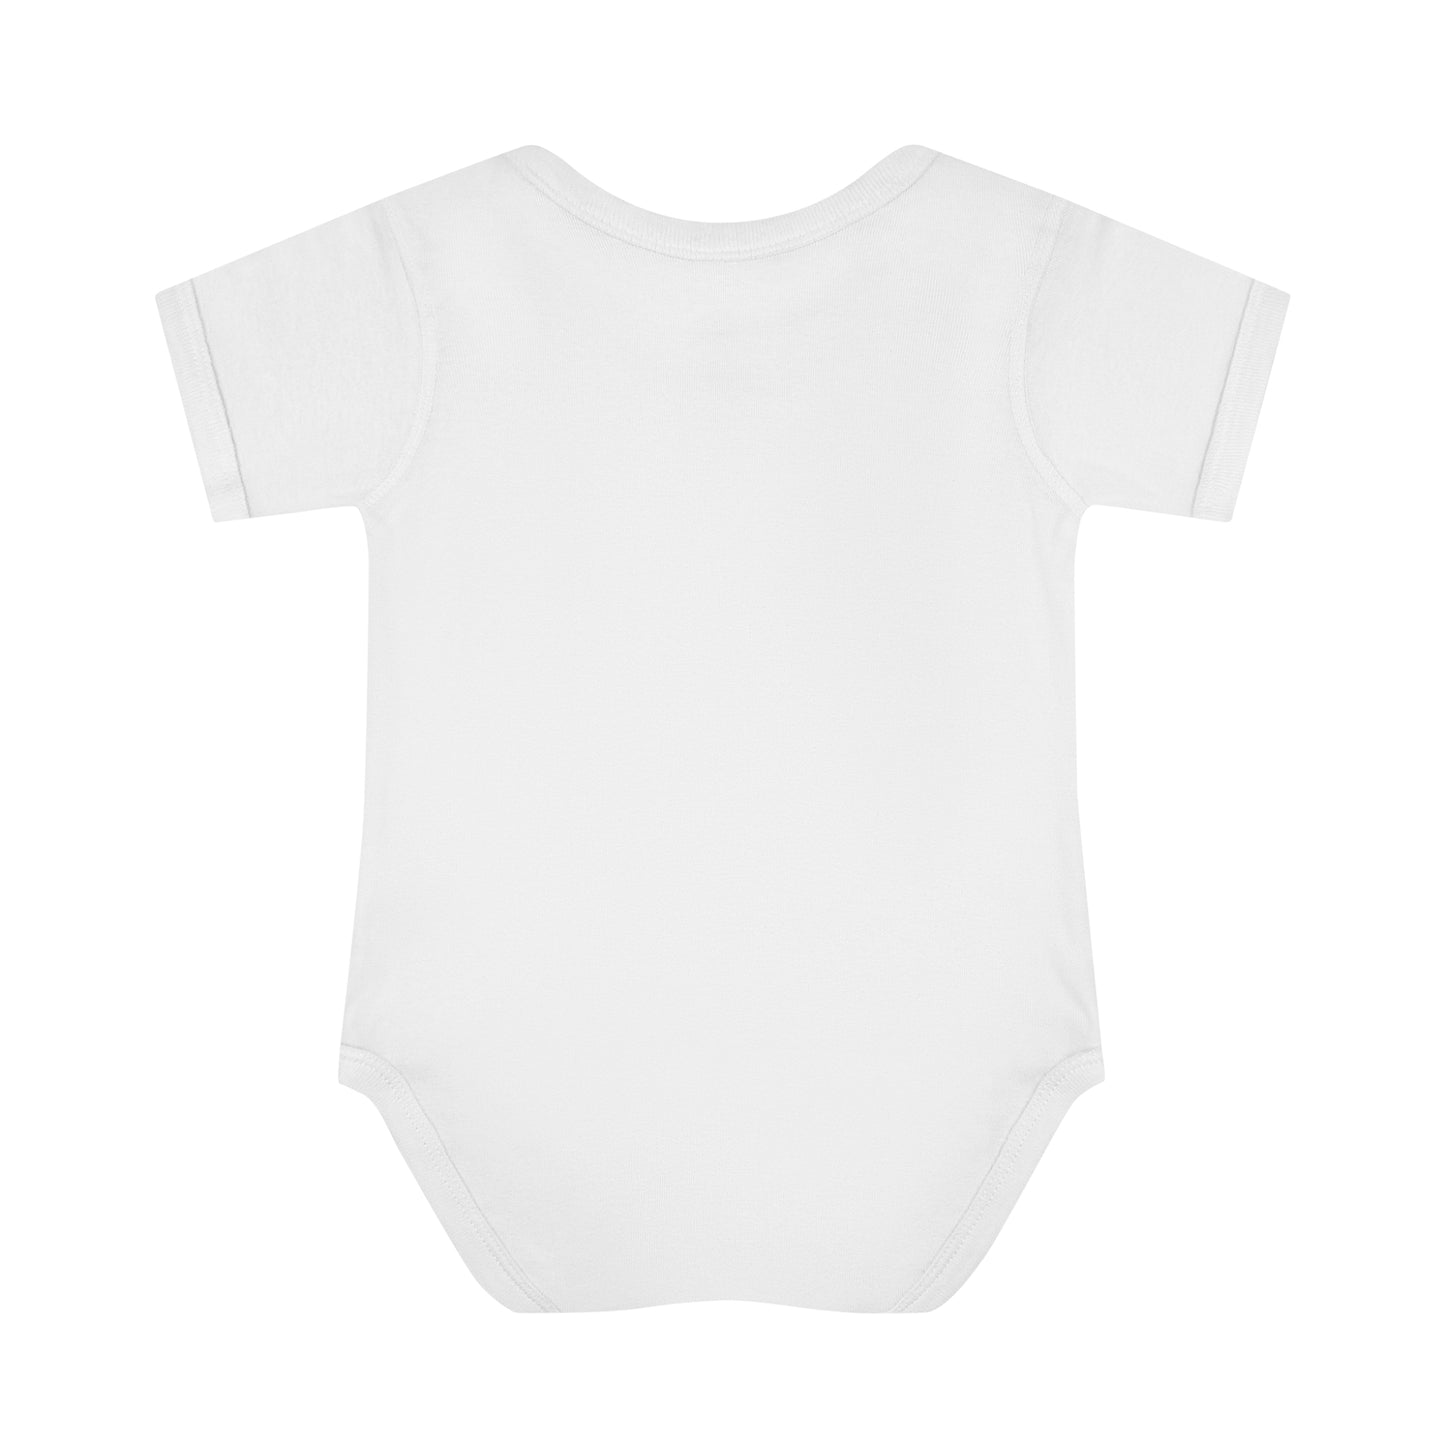 St. Patricks Day - " To Cute To Pinch" -Infant Baby Bodysuit